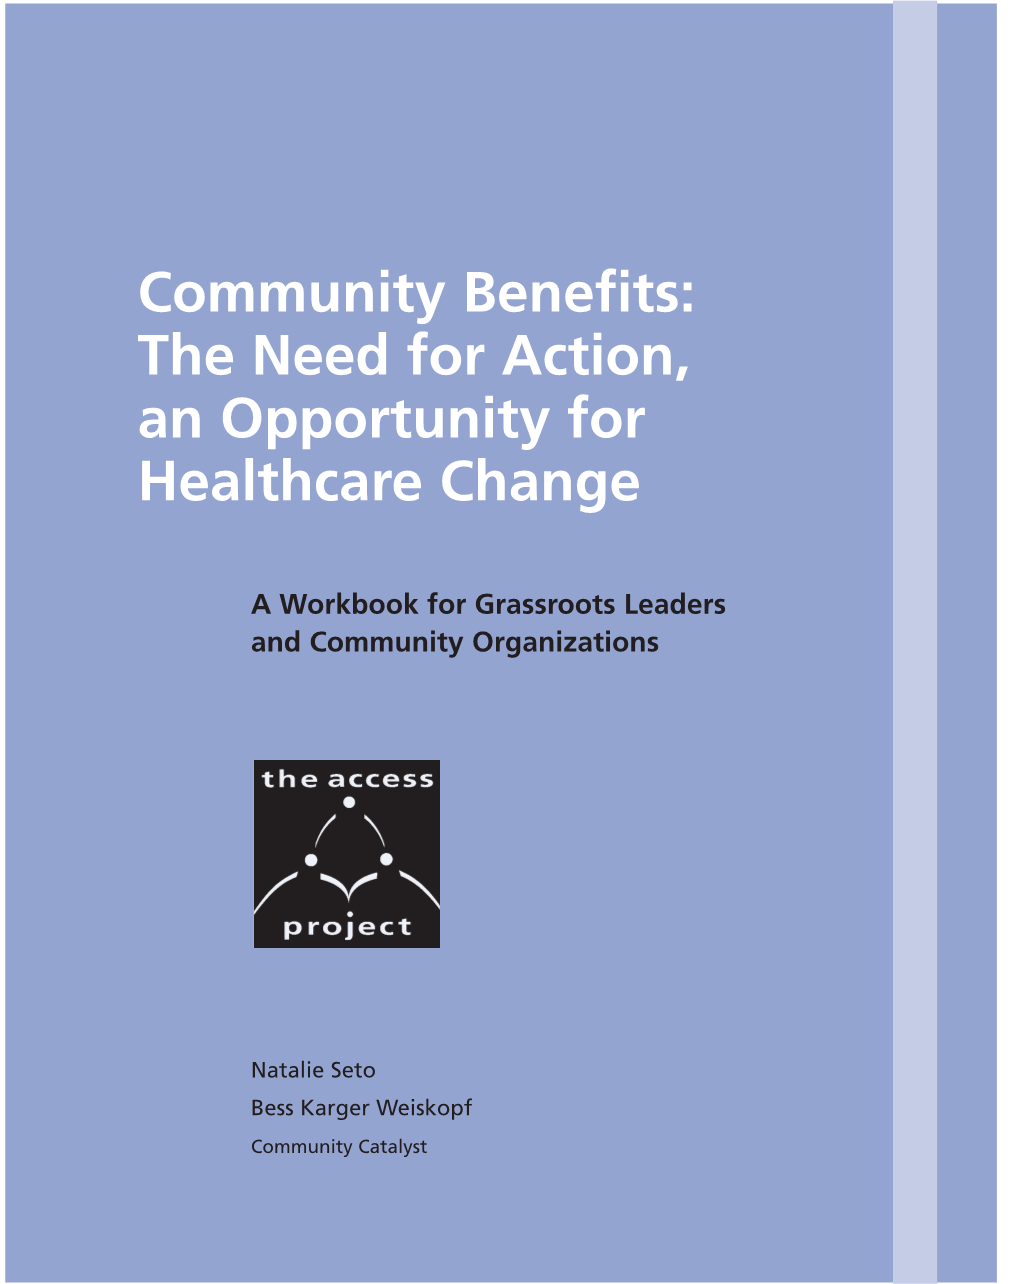 Community Benefits: the Need for Action, an Opportunity for Healthcare Change